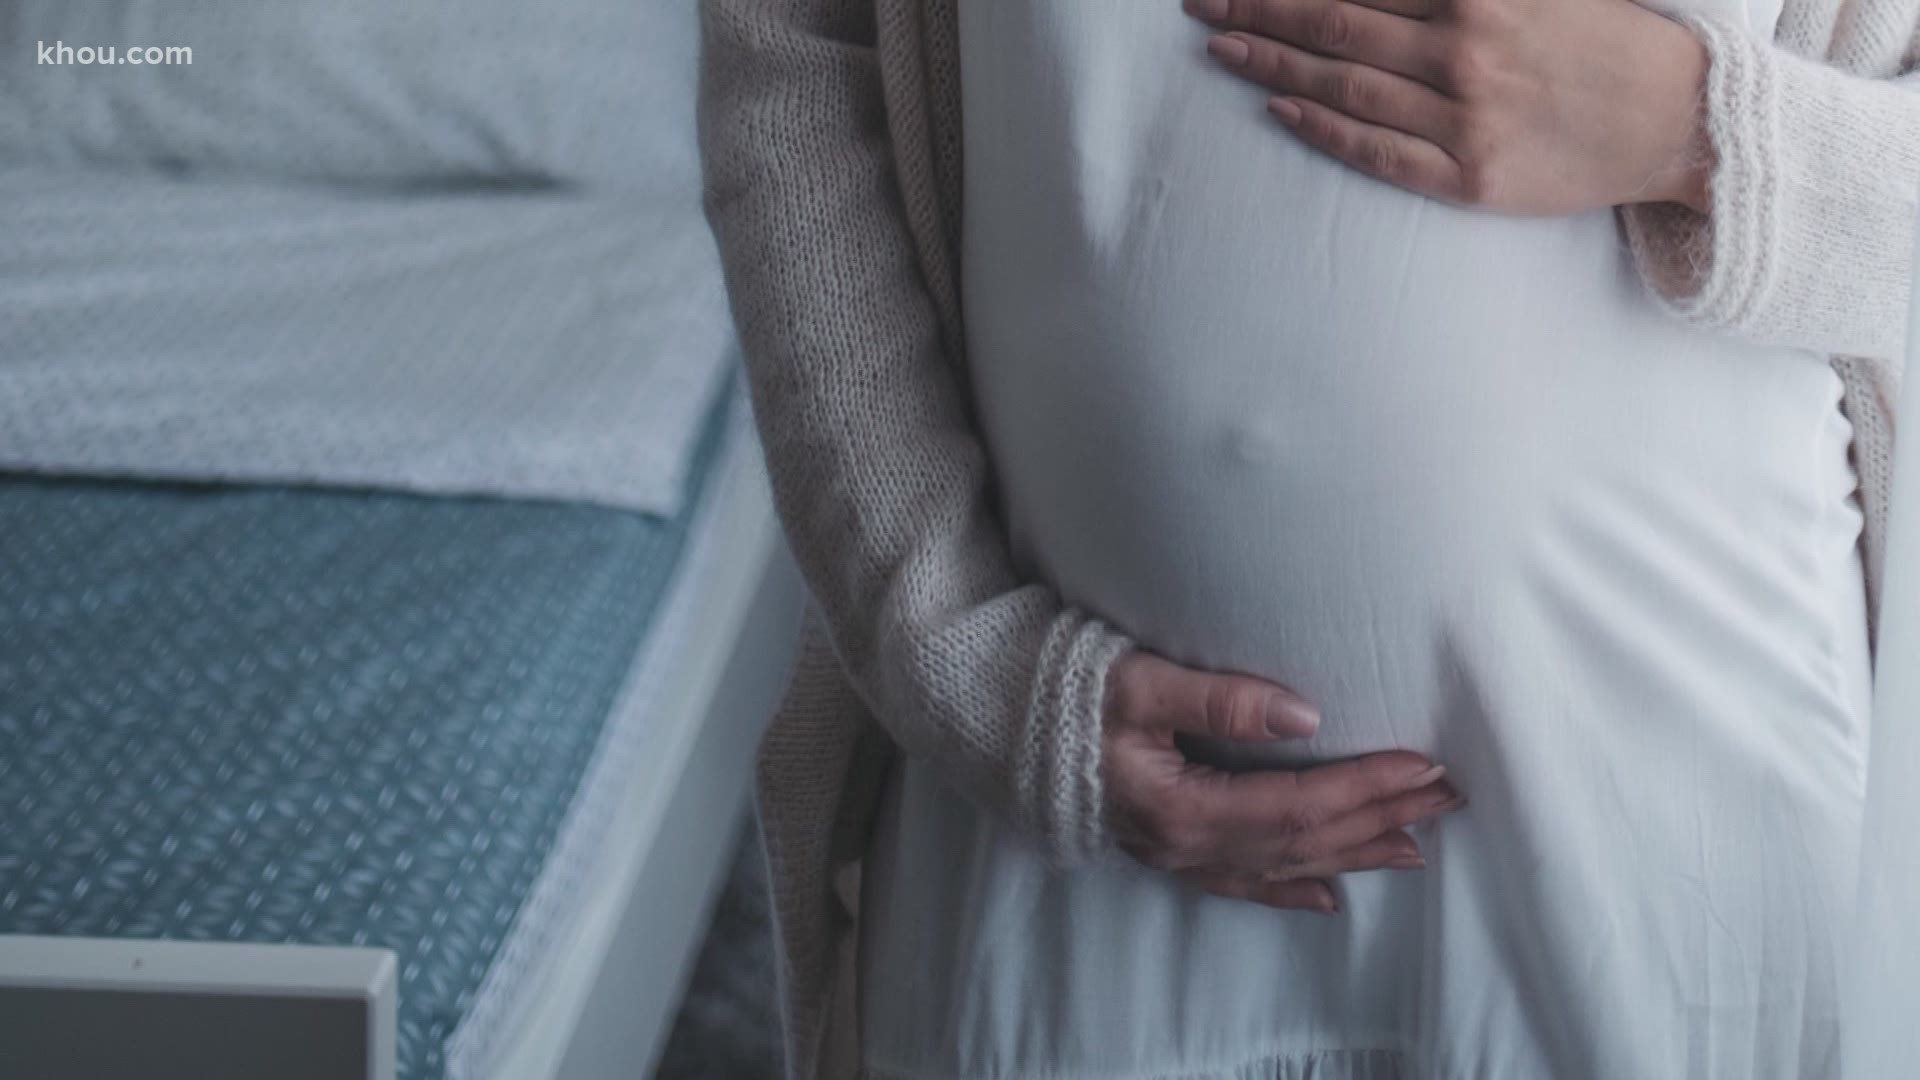 Some KHOU 11 viewers have asked about how the COVID-19 vaccine will affect pregnant women. We talked to infectious disease experts to get answers.